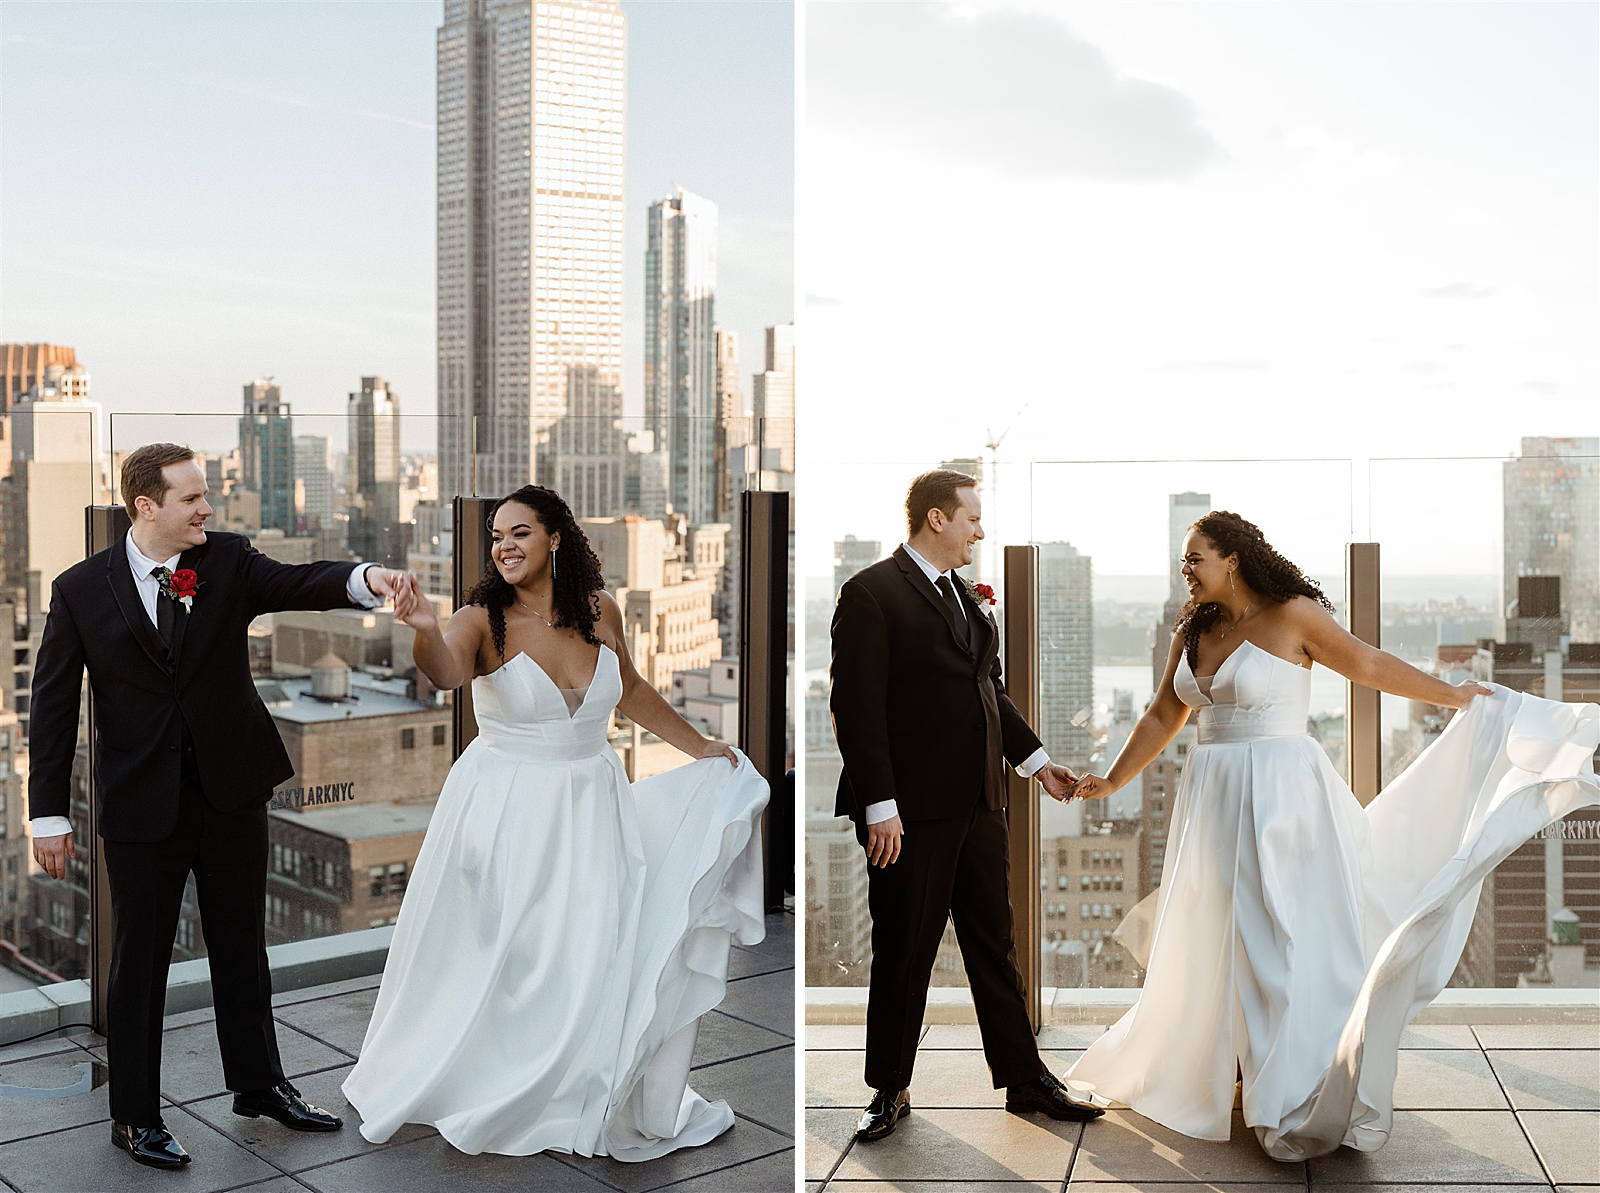 Left photo: Bride and Groom dance on the roof of the Skylark.
Right photo: Bride and Groom are all smiles as they hold hands on top of the Skylark.